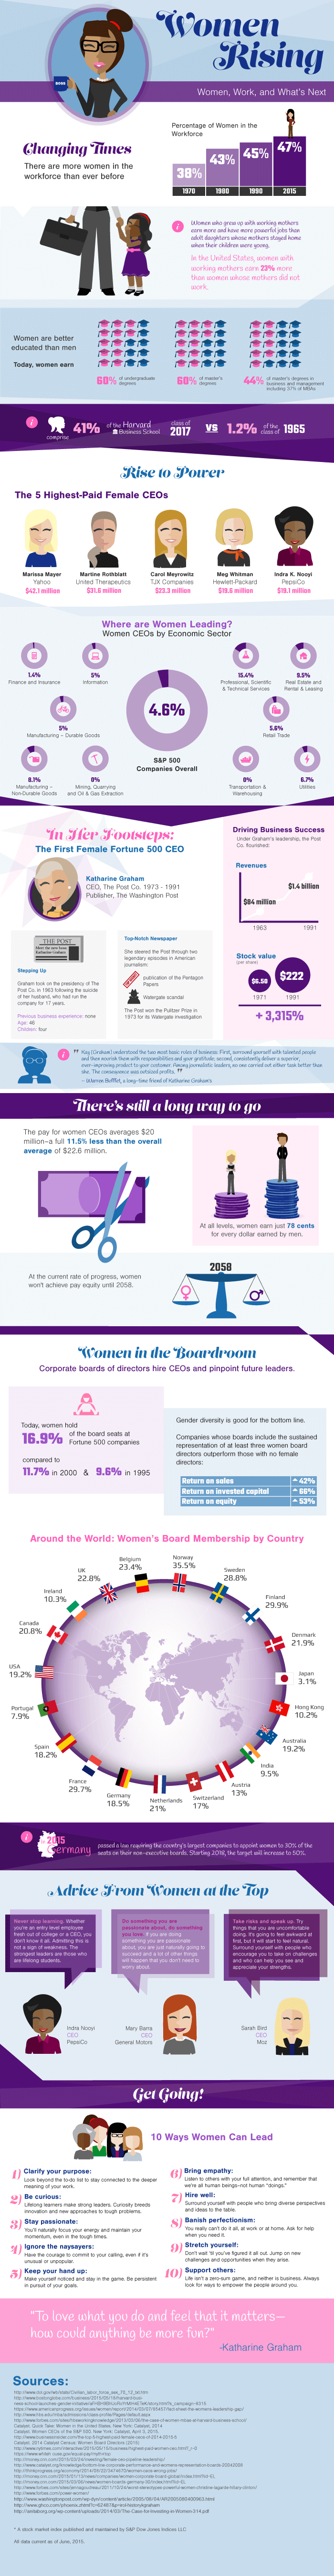 women in business progress and advice infographic